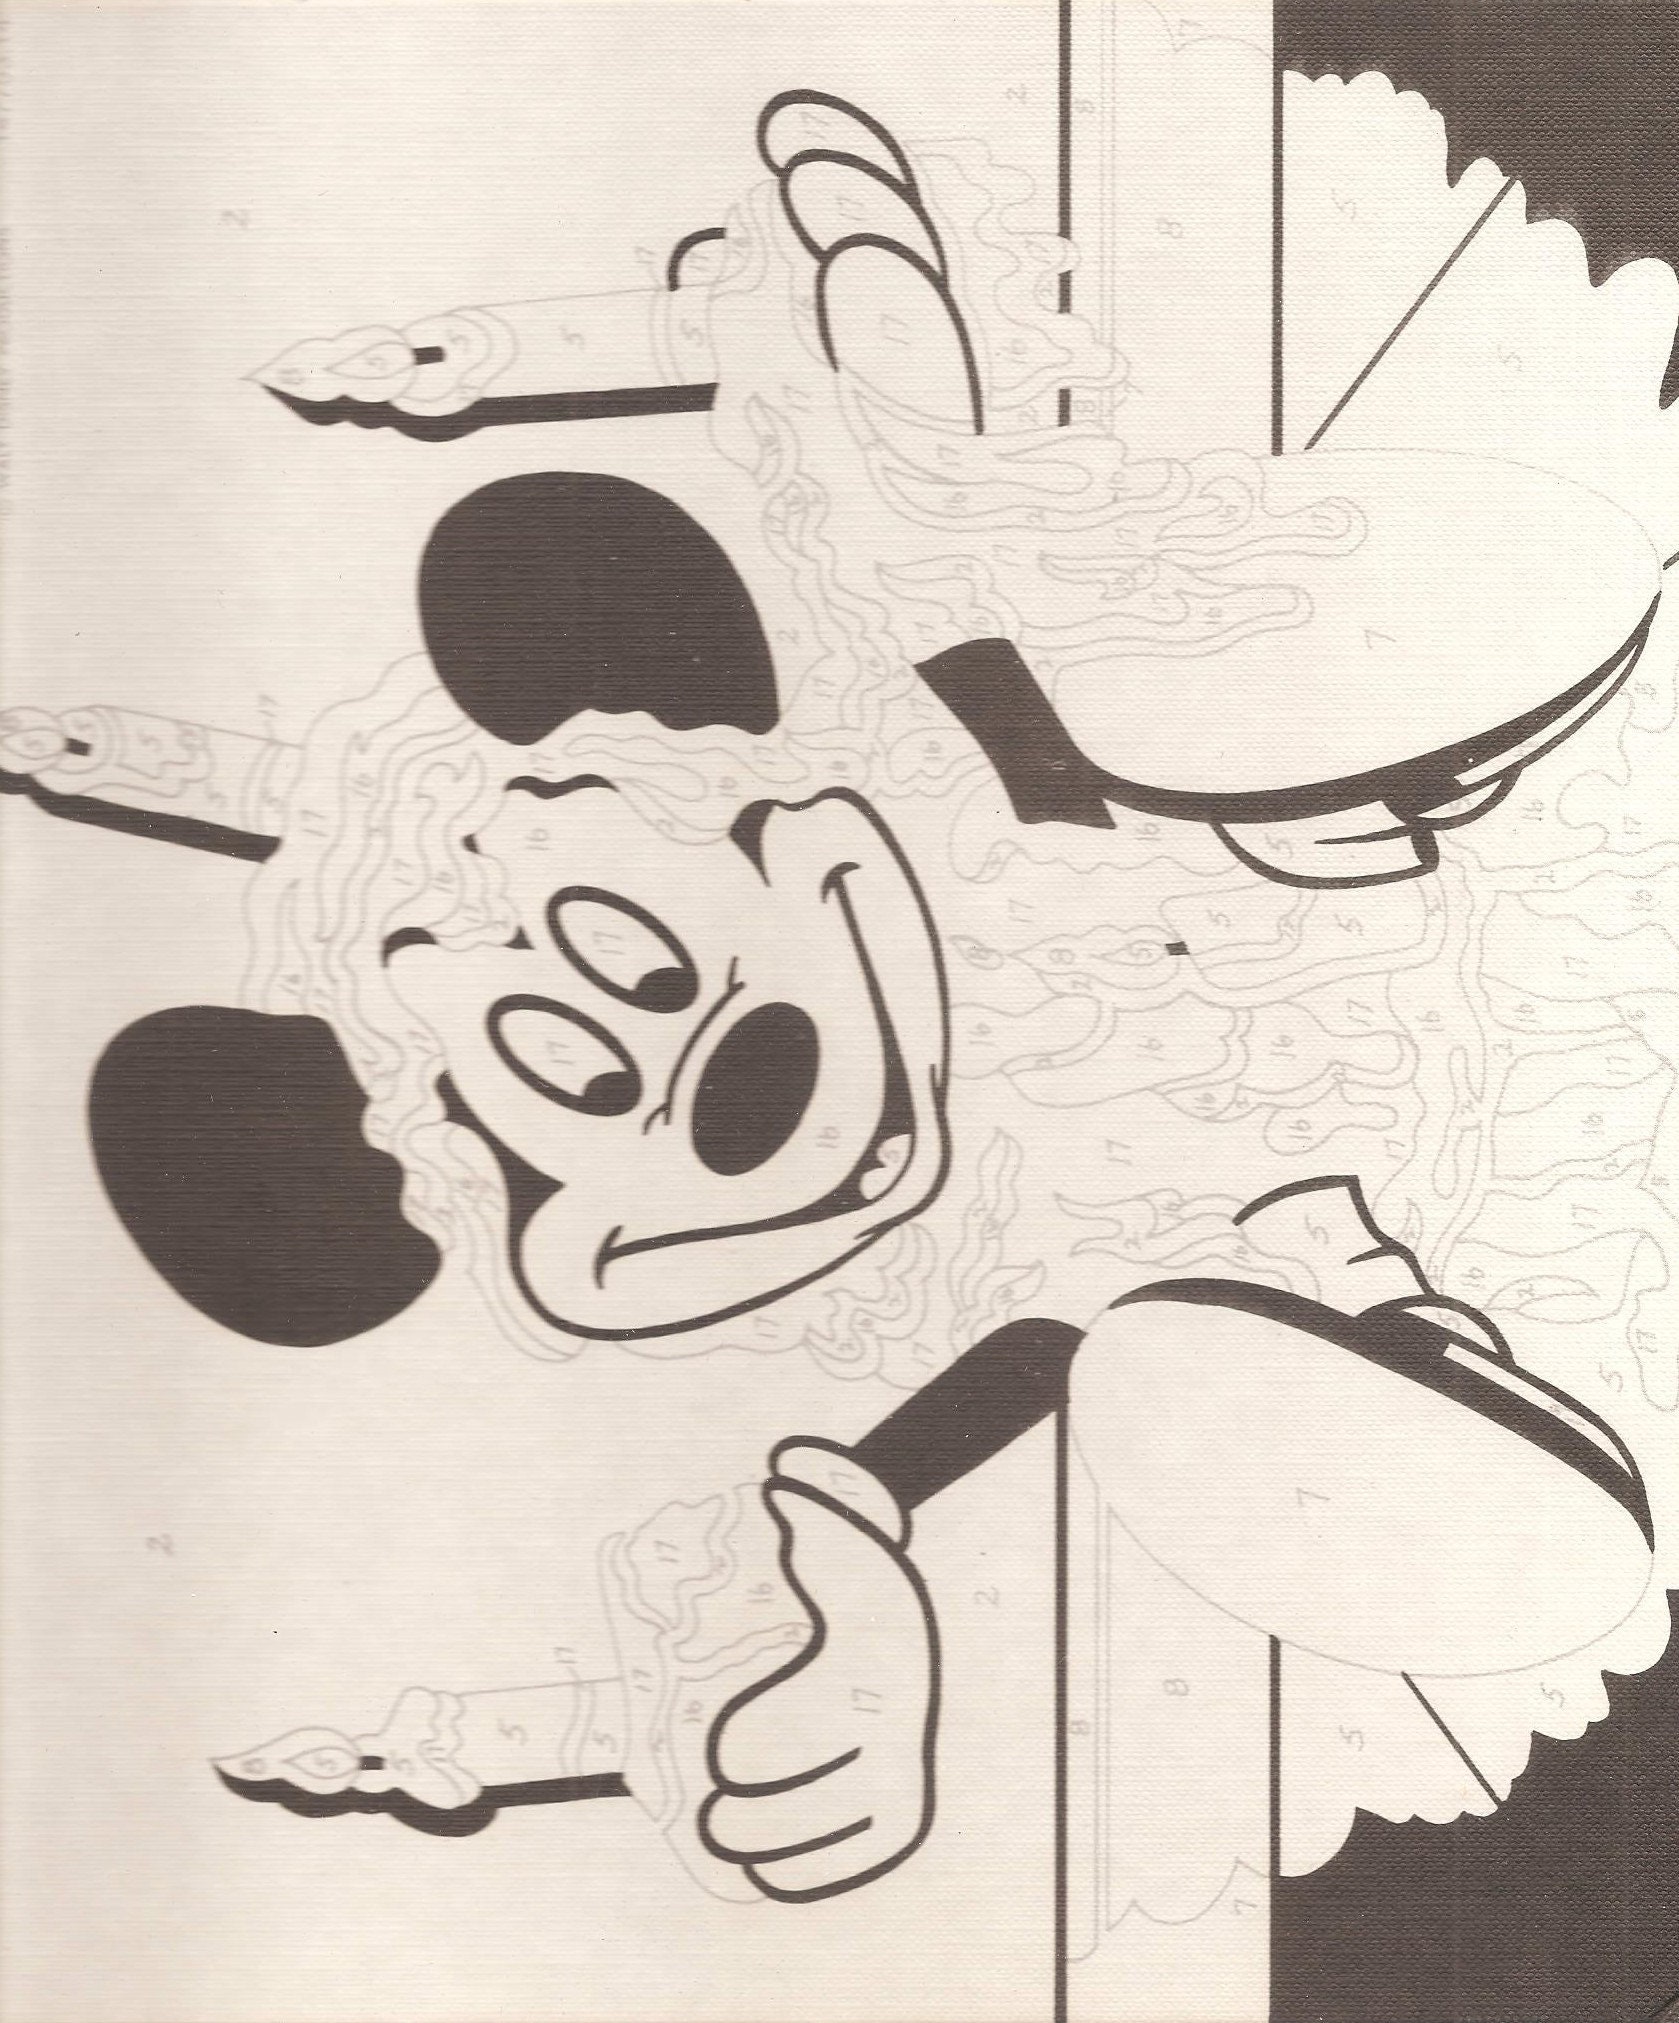 Disney Mickey Mouse Orchestra Paint By Numbers - NumPaints - Paint